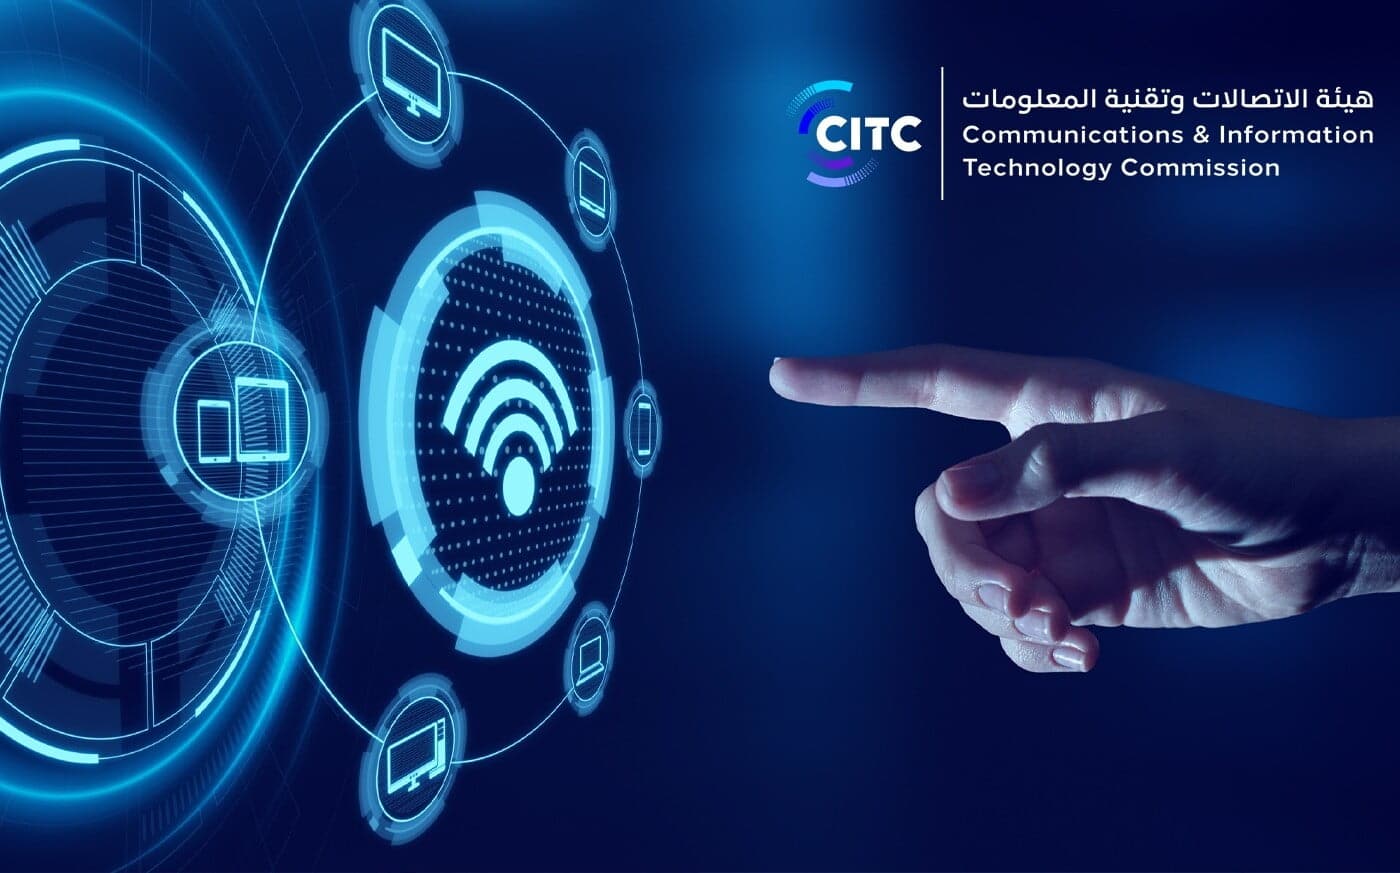 CITC launches an initiative to deploy 60,000 free Wi-Fi hotspots in public places